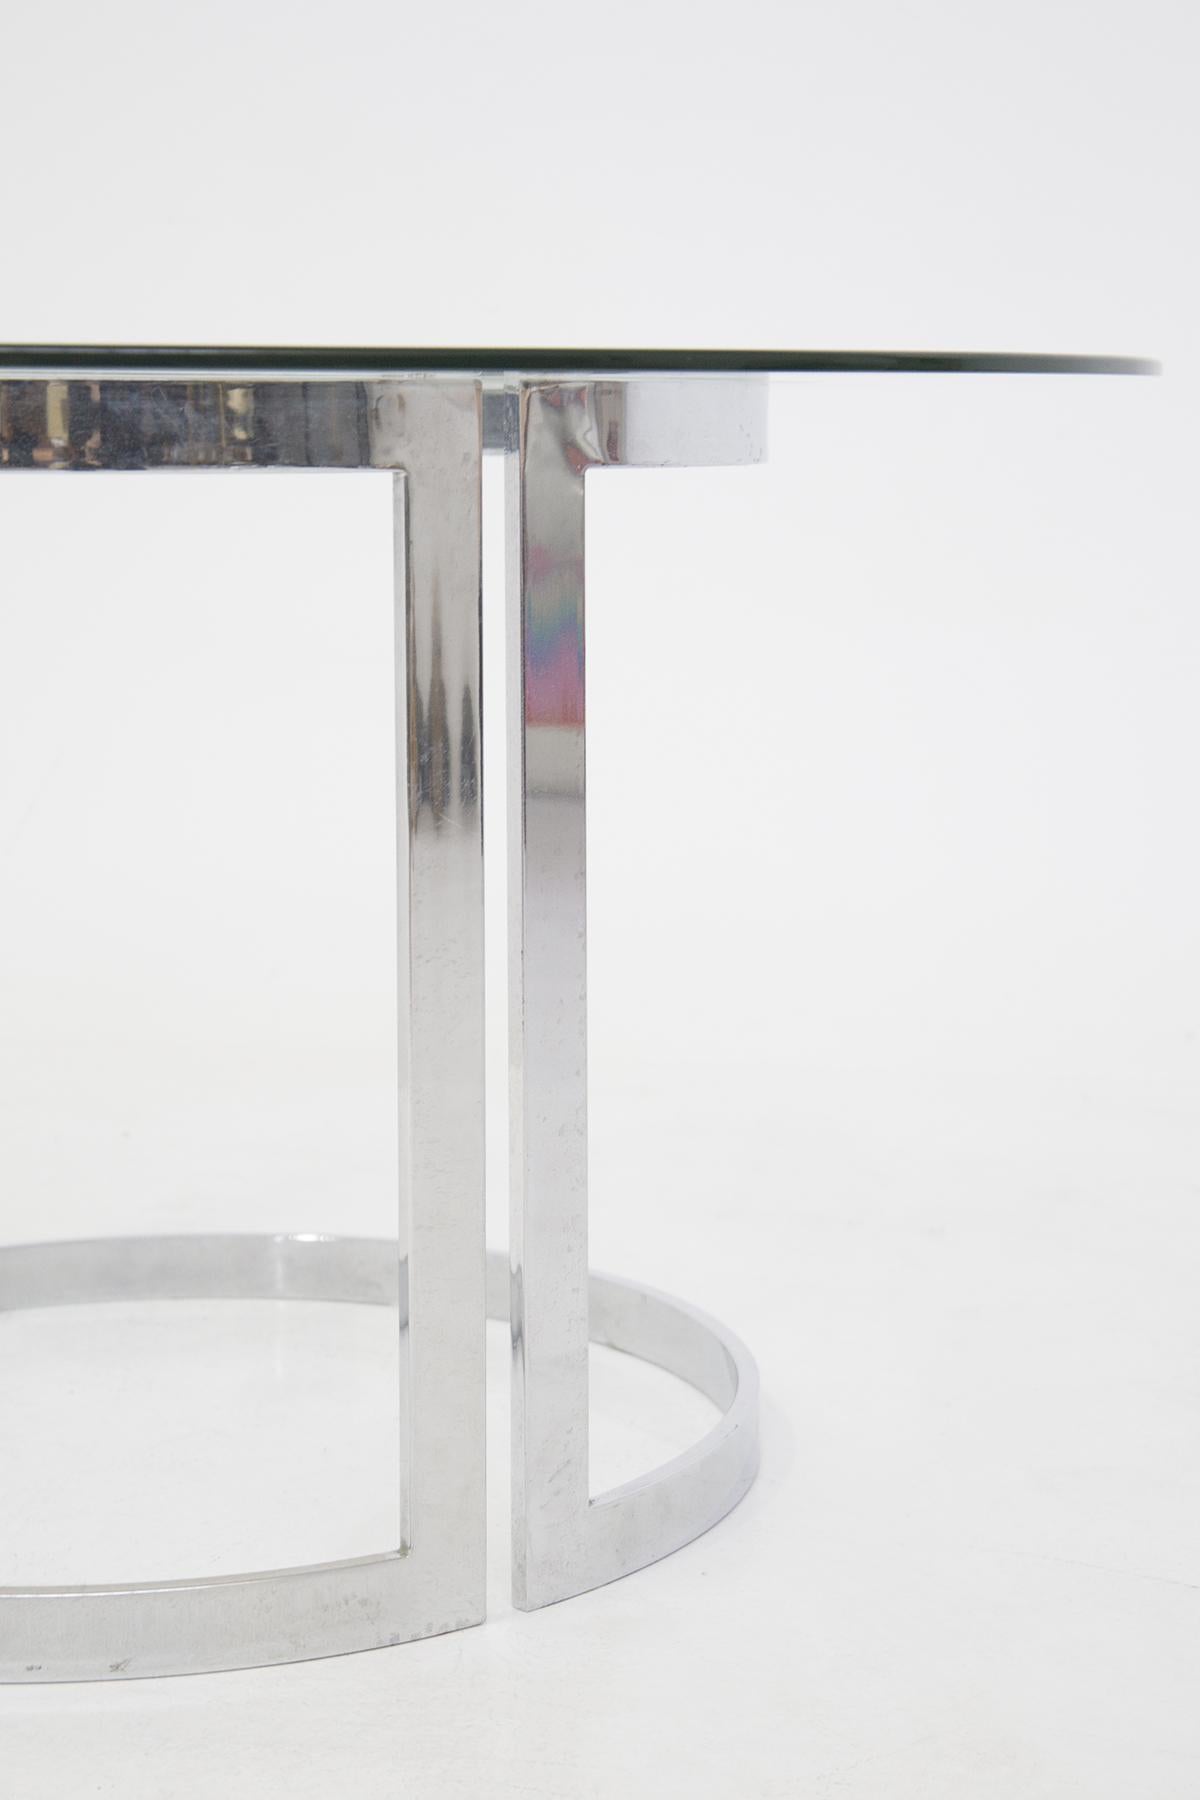 Beautiful glass coffee table designed by the great Vittorio Introini for Vips Residence, of fine Italian manufacture.
The table has a totally transparent glass top, very elegant and fine. The supporting structure is made of chromed metal, the legs